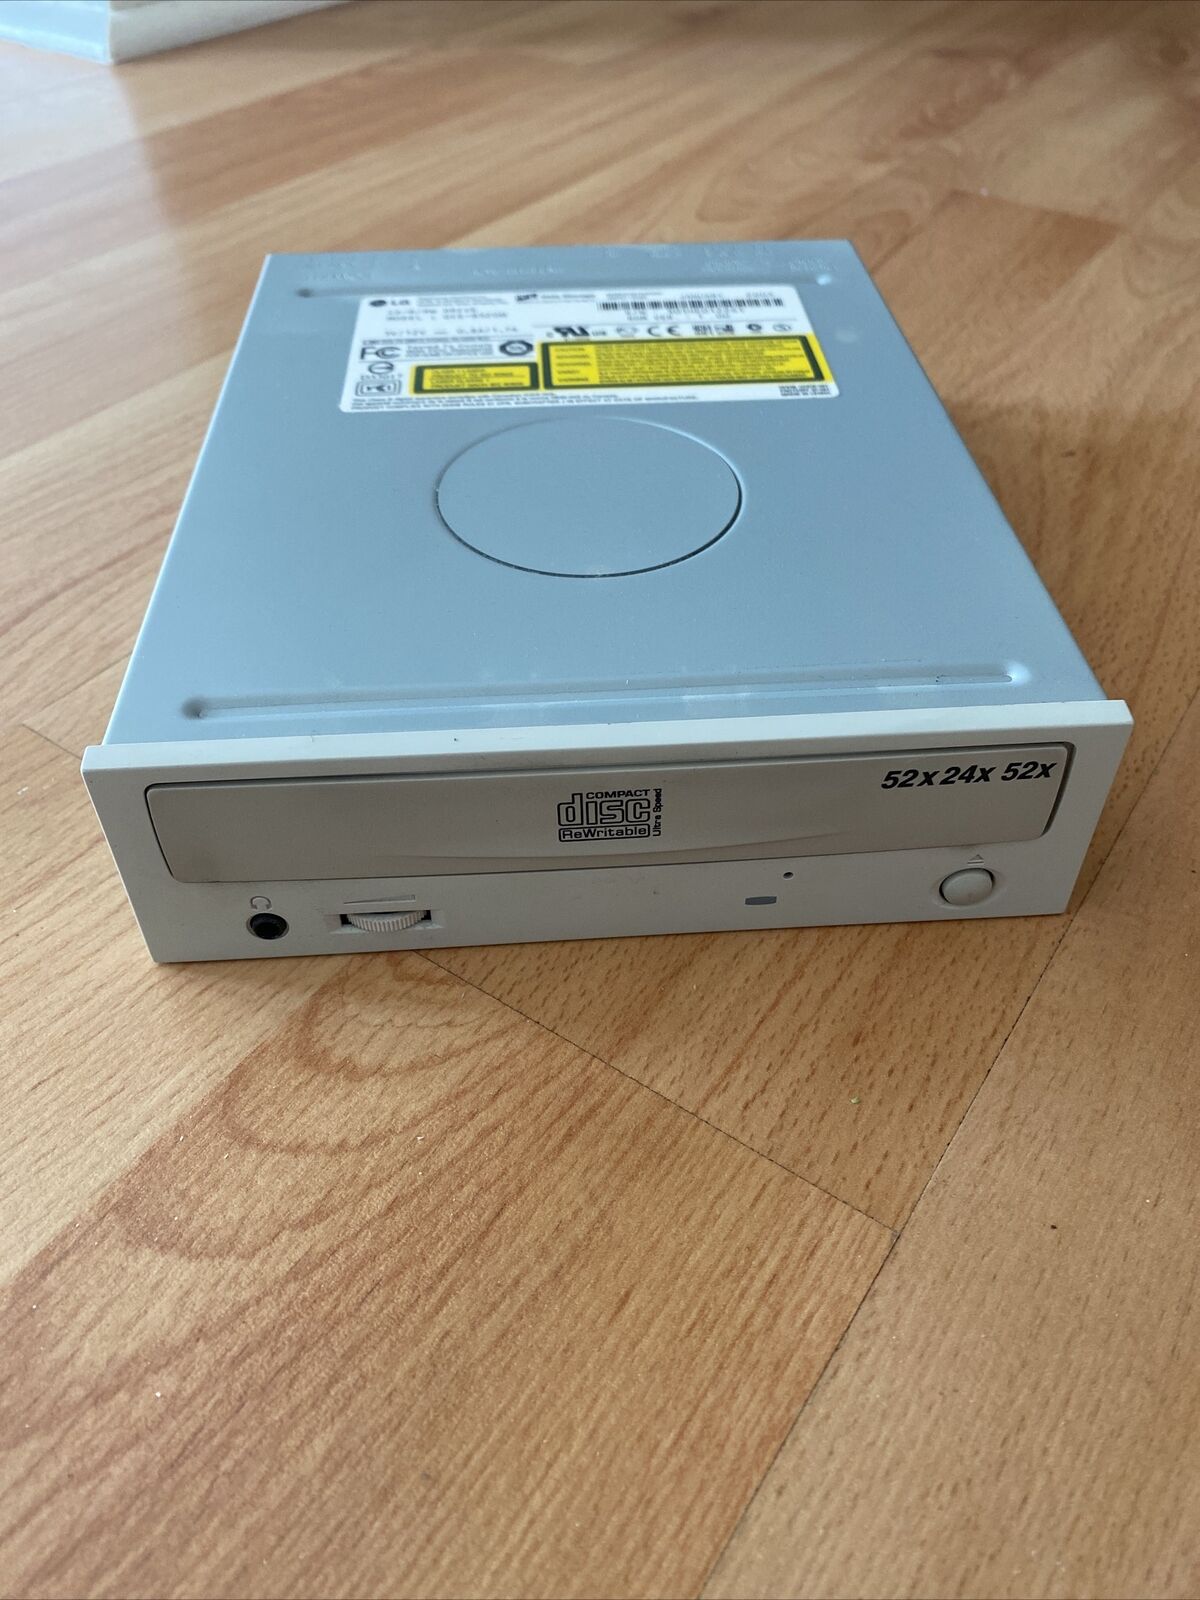 LG GCE-8520B Combo CD-R/RW Drive - Tested And Working